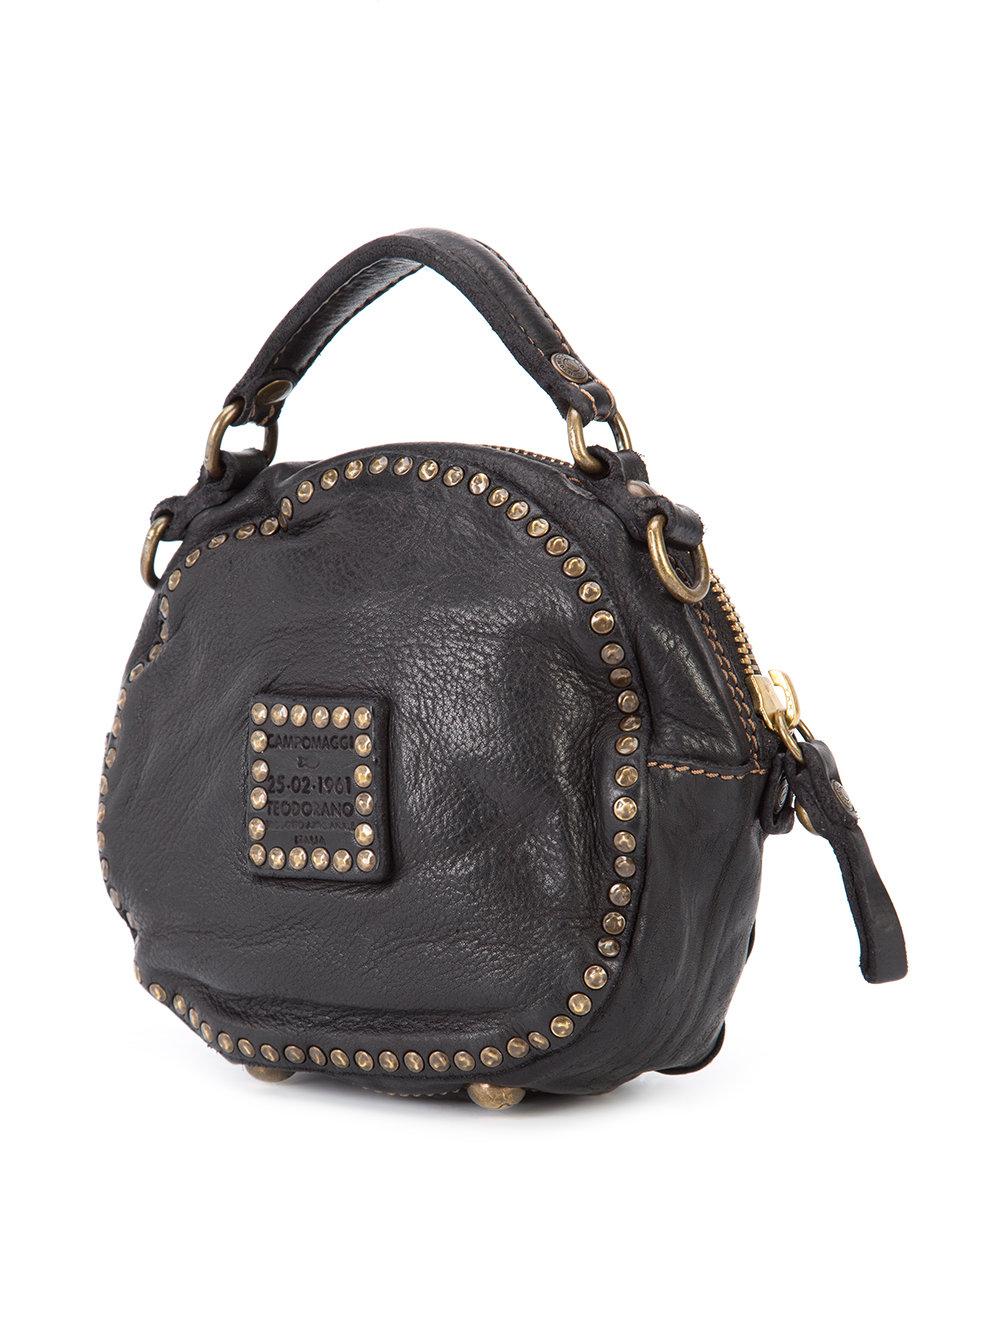 Lyst - Campomaggi - Round Embellished Shoulder Bag - Women - Leather - One Size in Brown